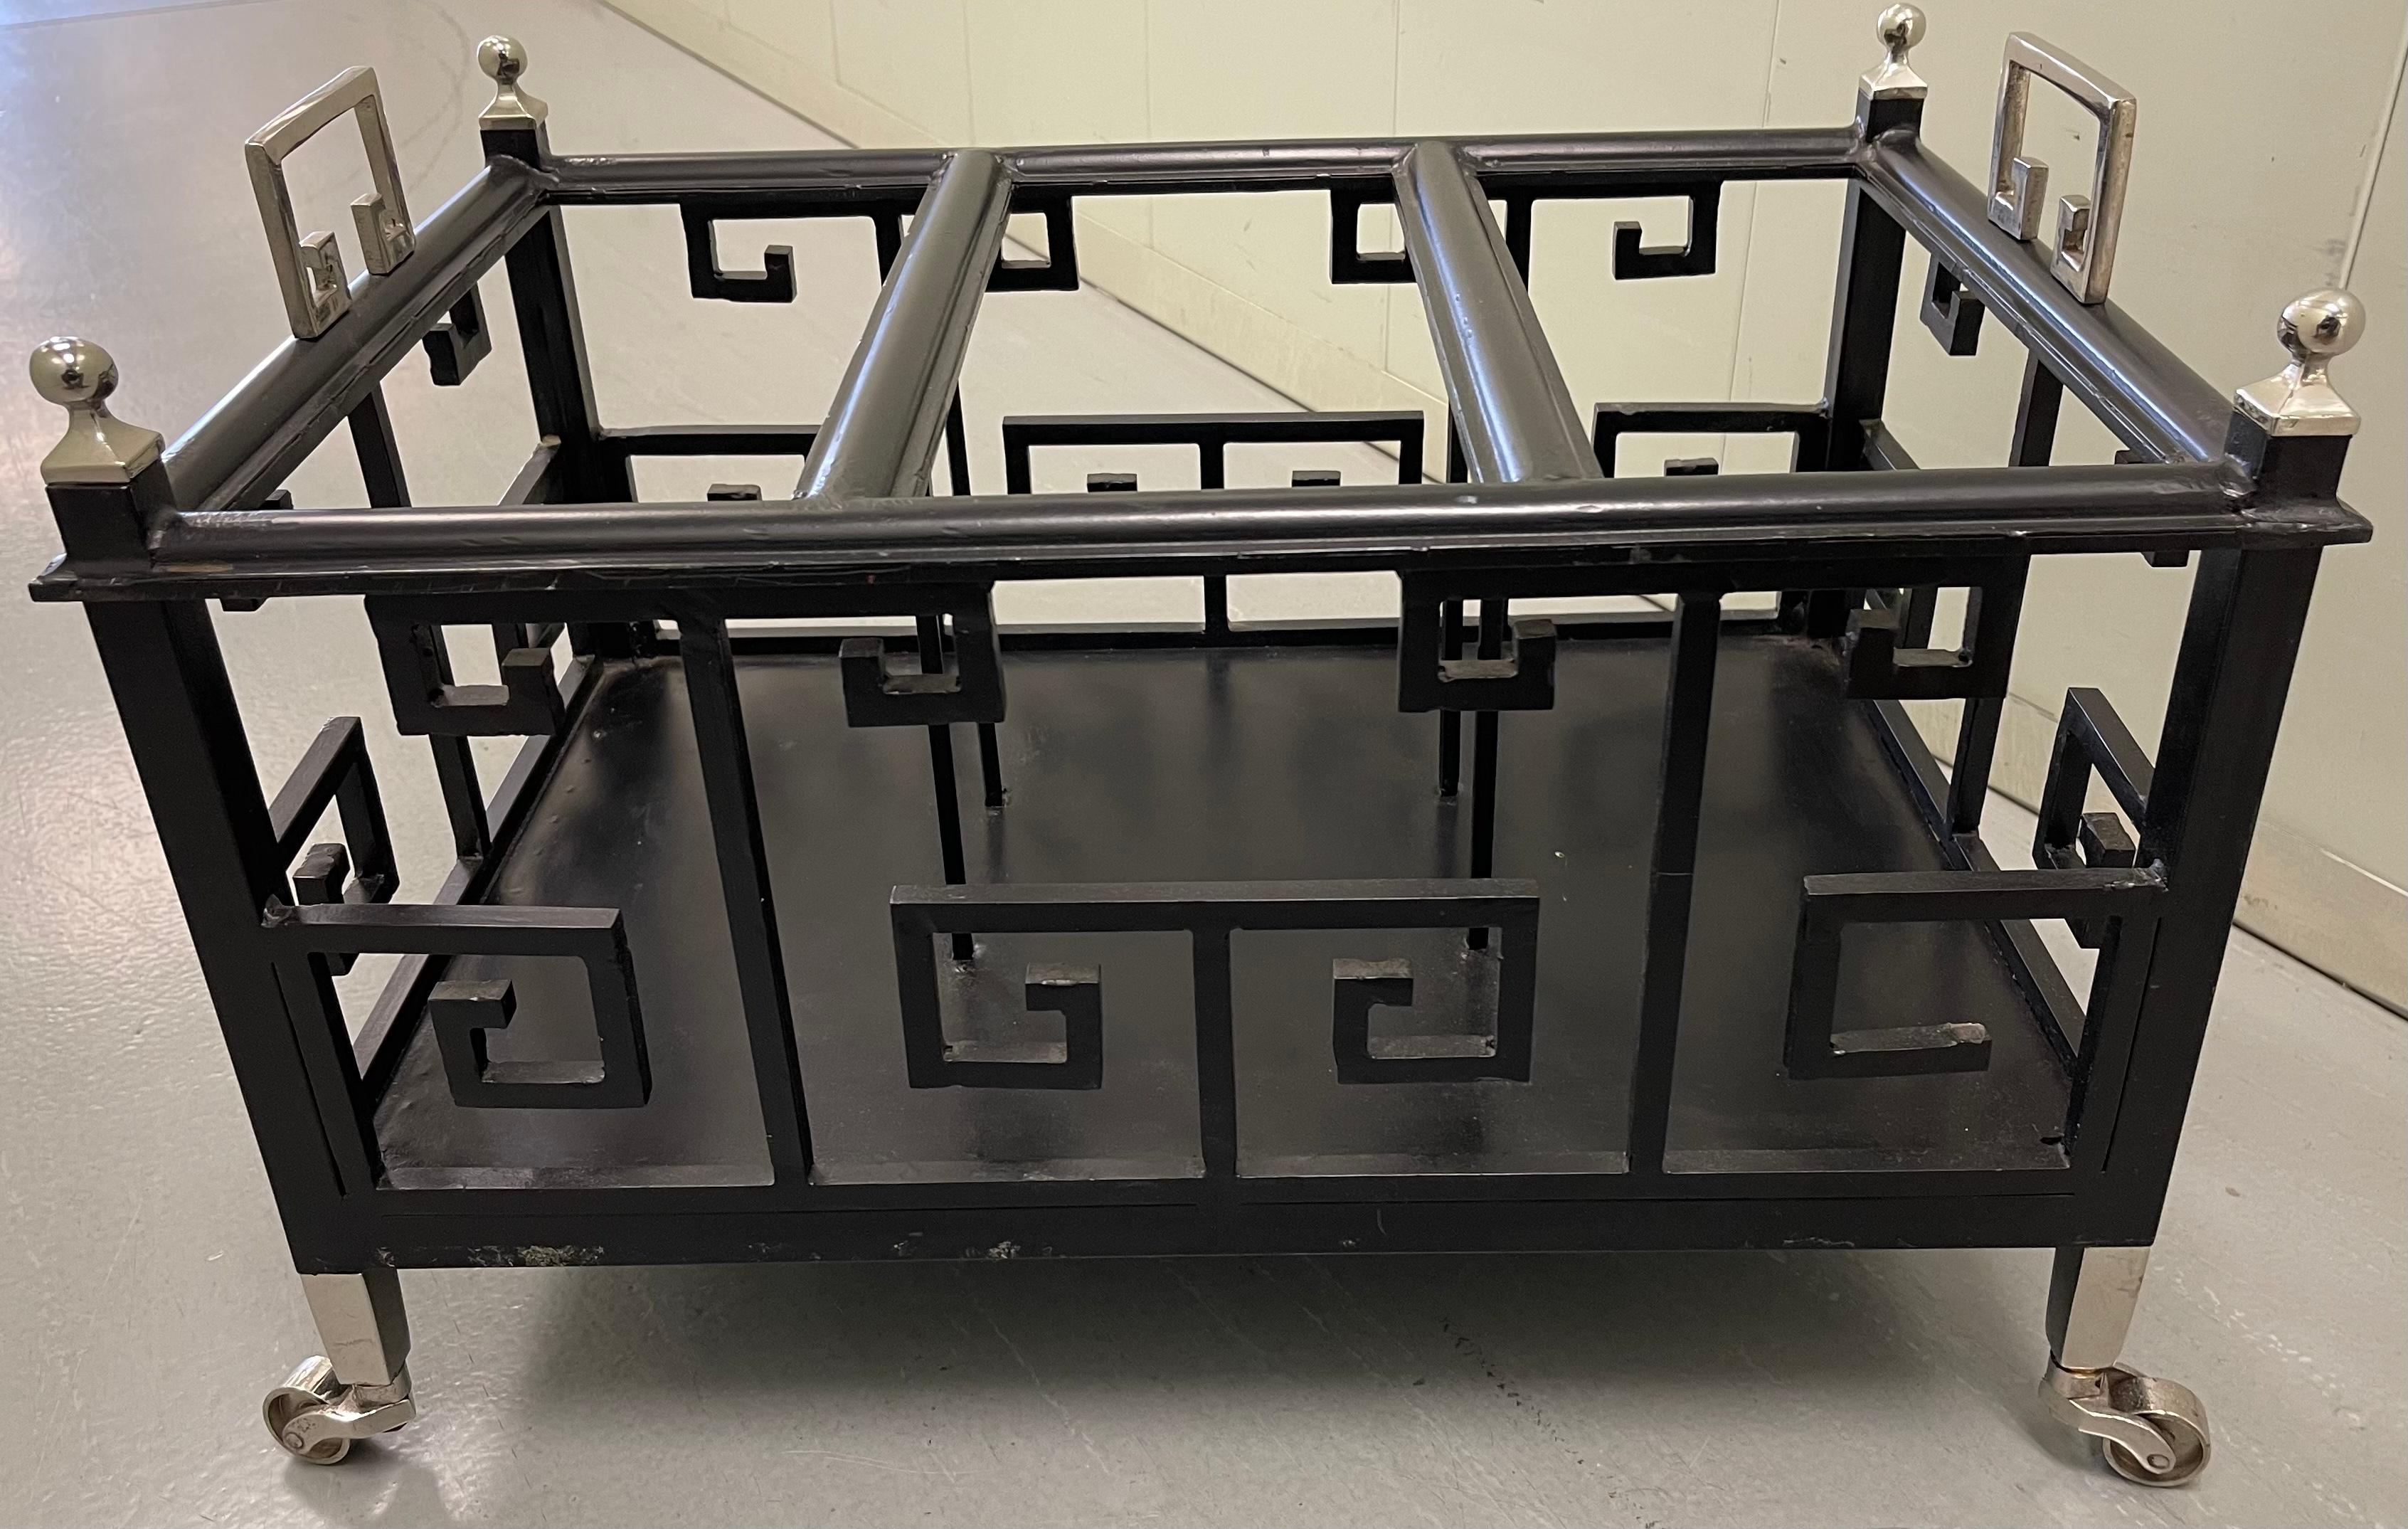 Black wrought iron Greek key motif Canterbury or magazine rack. Polished nickel handles and ball finals. Polished nickel wheels are in working condition. No makers mark or signature. Very well made, heavy piece.